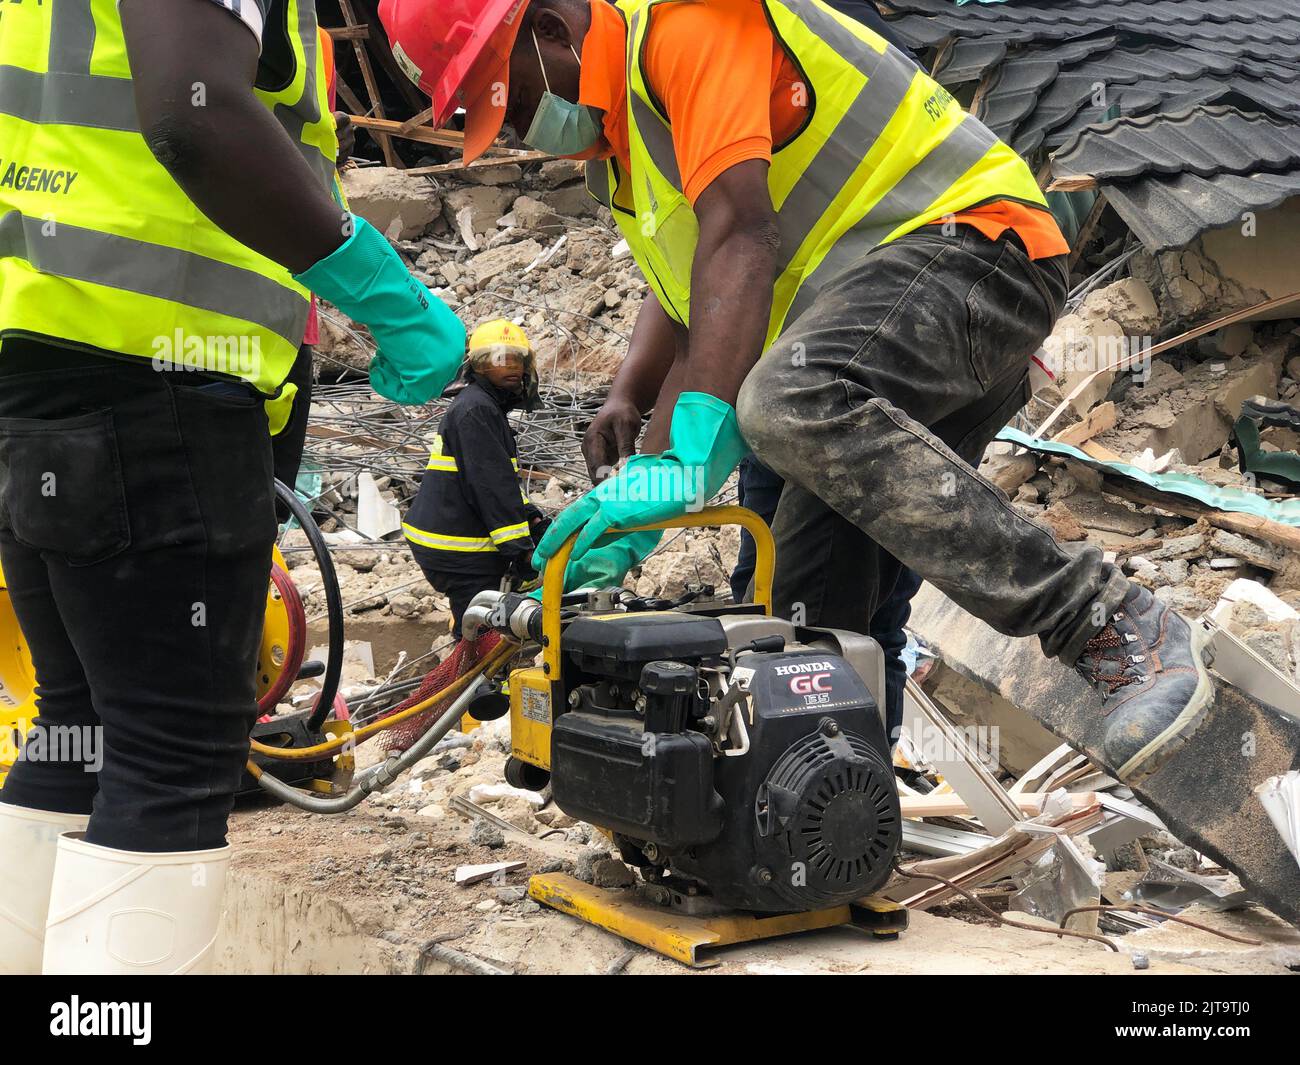 Abuja, Nigeria. 29th August 2022. Rescue workers at the scene of a collapsed building in Kubwa, a suburb of Abuja, Nigeria’s capital city. Two persons were confirmed dead after a three-storey building under reconstruction collapsed. Credit: Majority World CIC/Alamy Live News Stock Photo